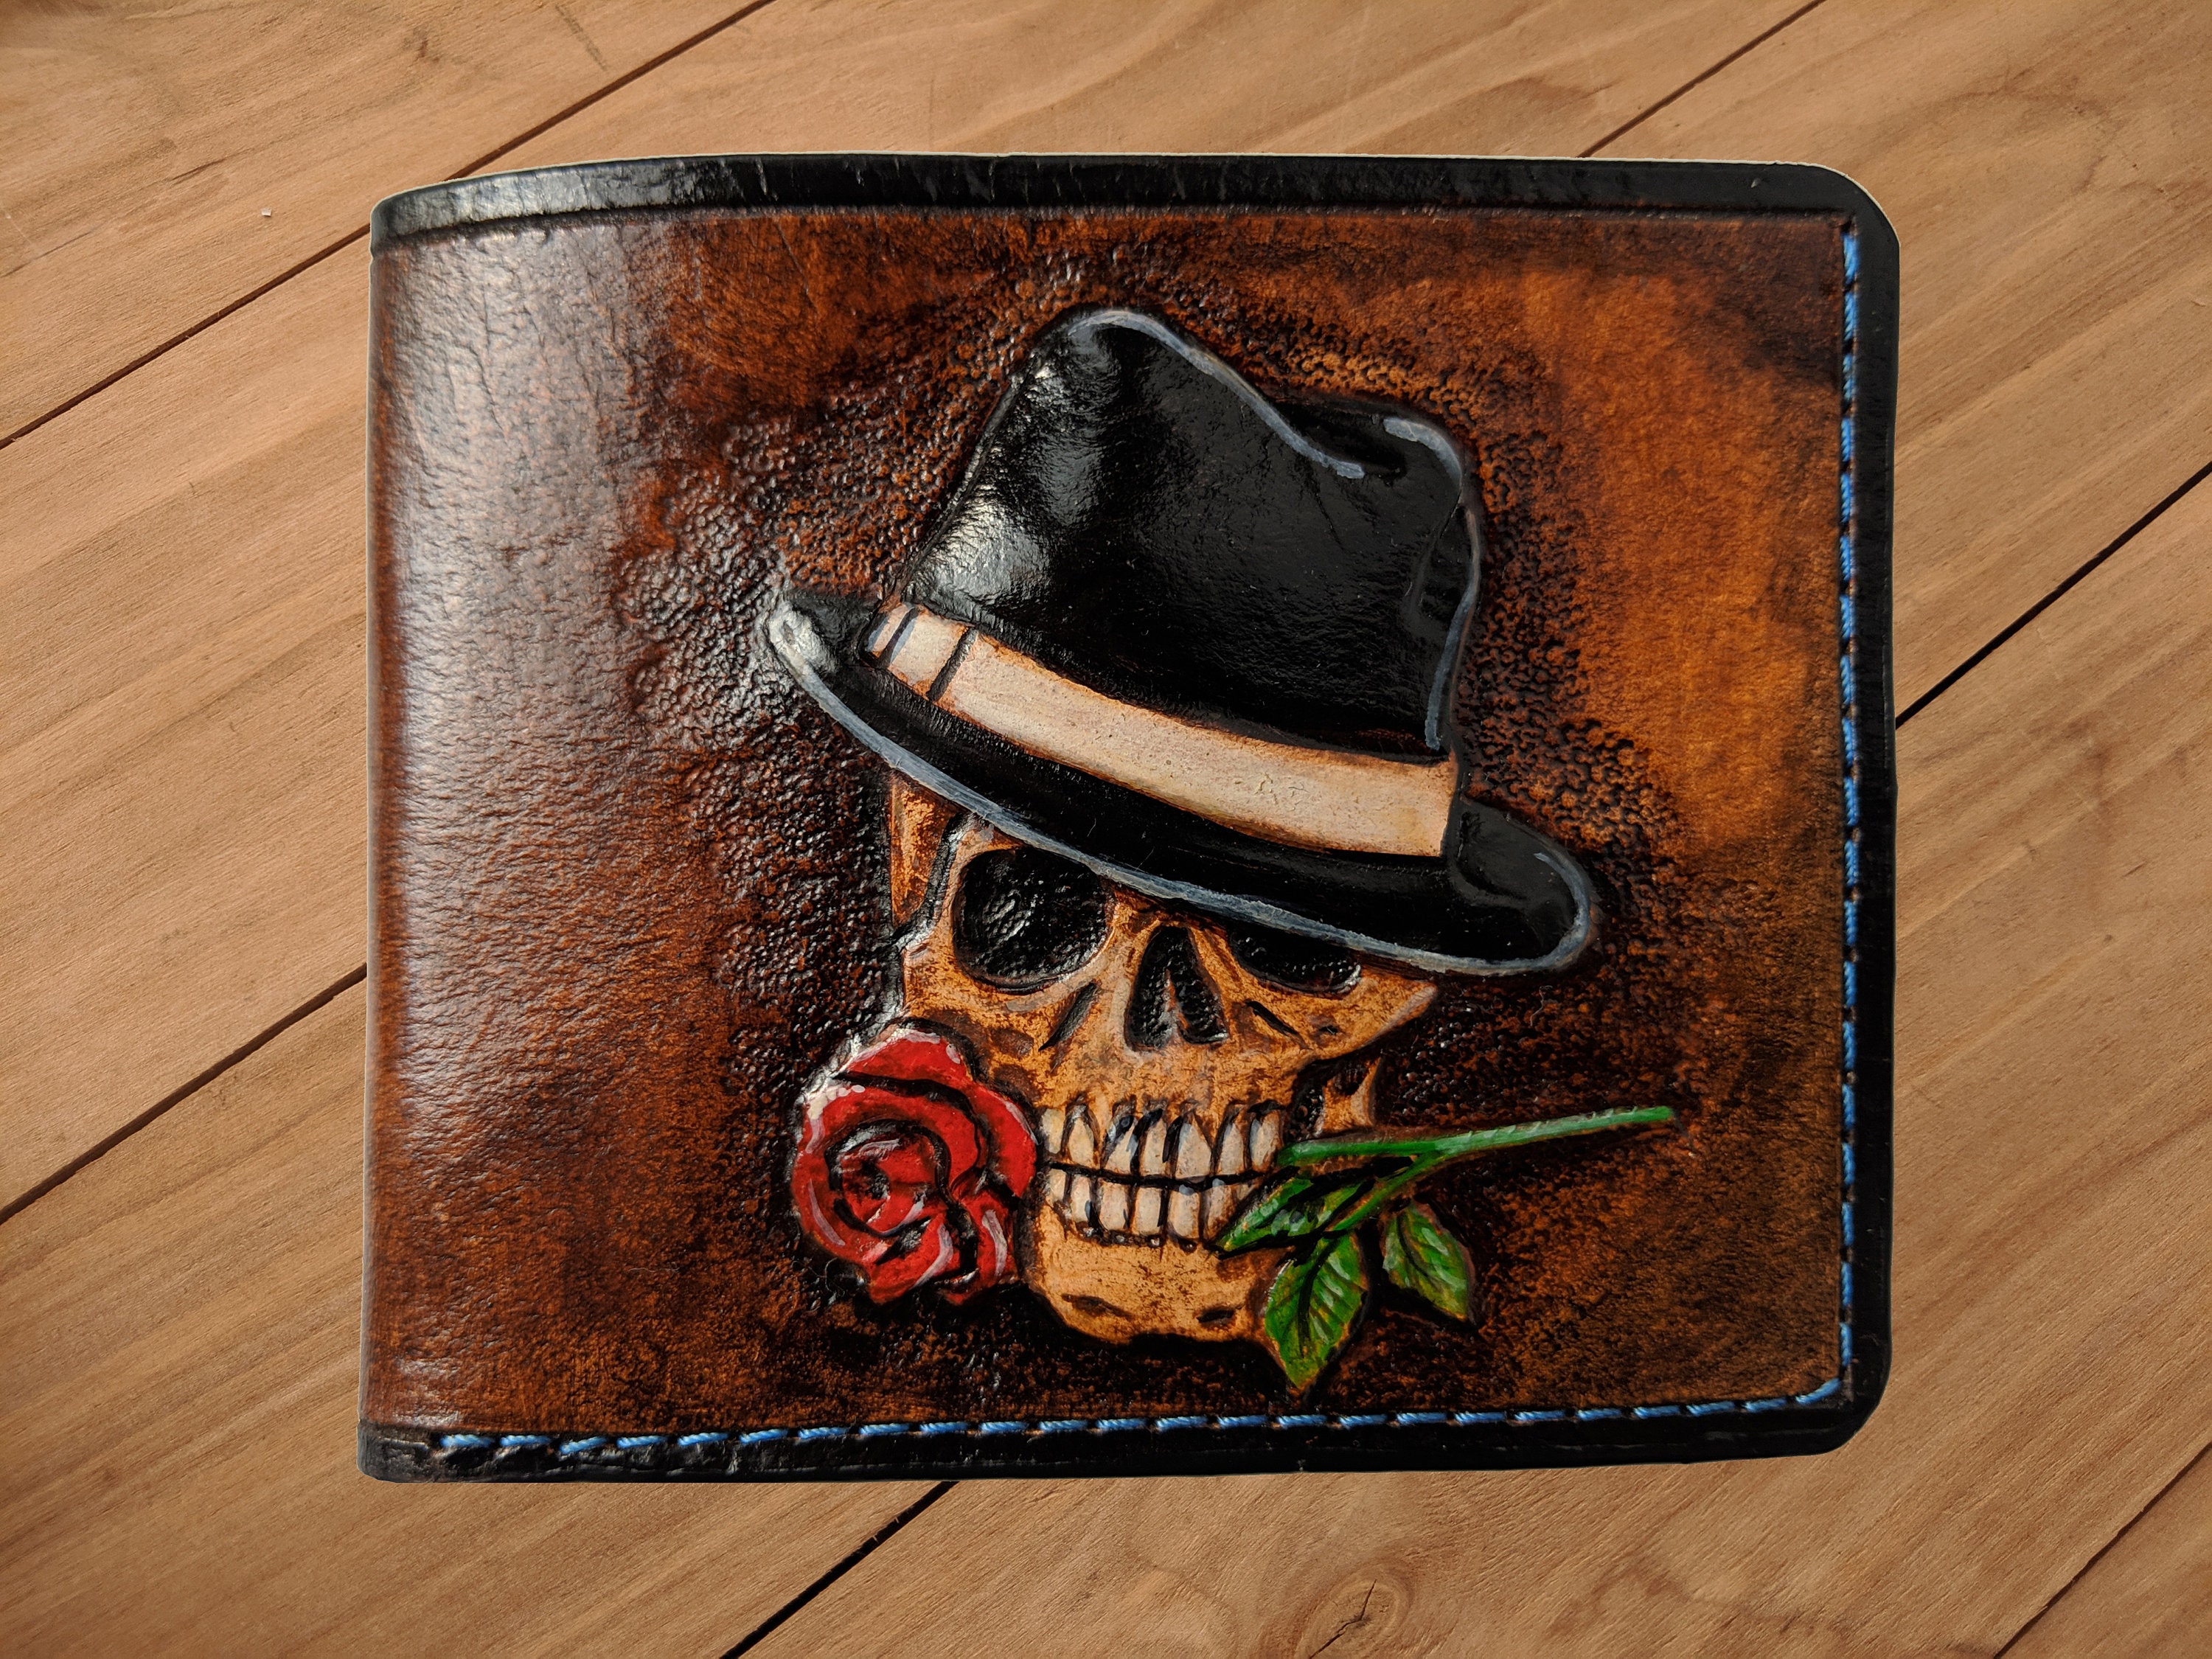  Men's 3D Genuine Leather Wallet, Money clip, Hand-Carved, Hand- Painted, Leather Carving, Custom wallet, Personalized wallet, Skull,  Skeleton, Rose : Handmade Products